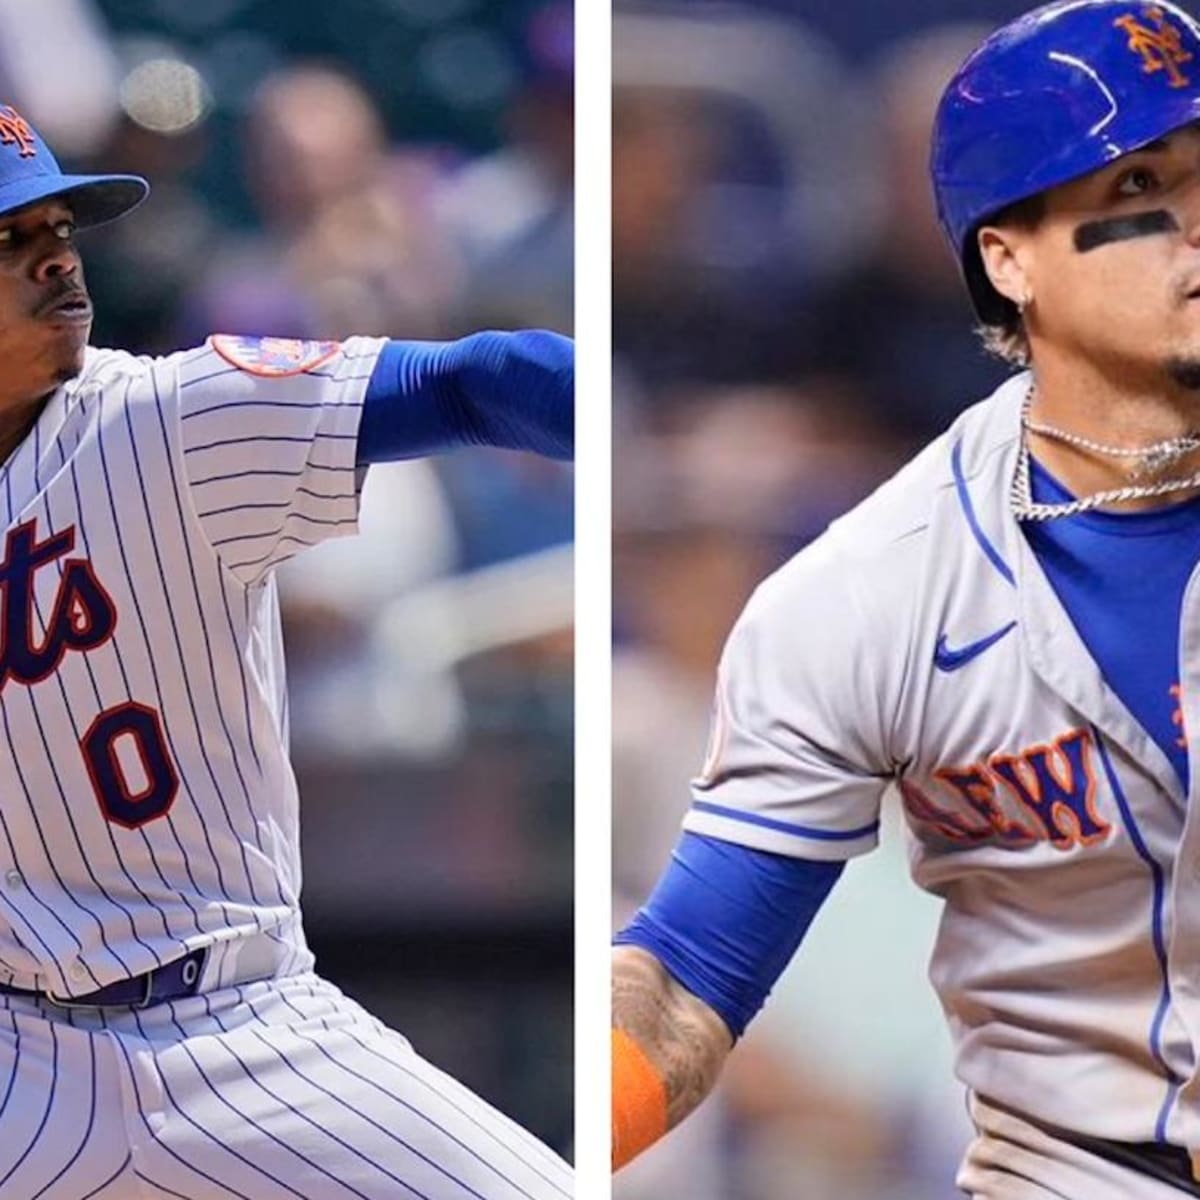 Michael Conforto, Jeff McNeil to IL as Mets injuries grow